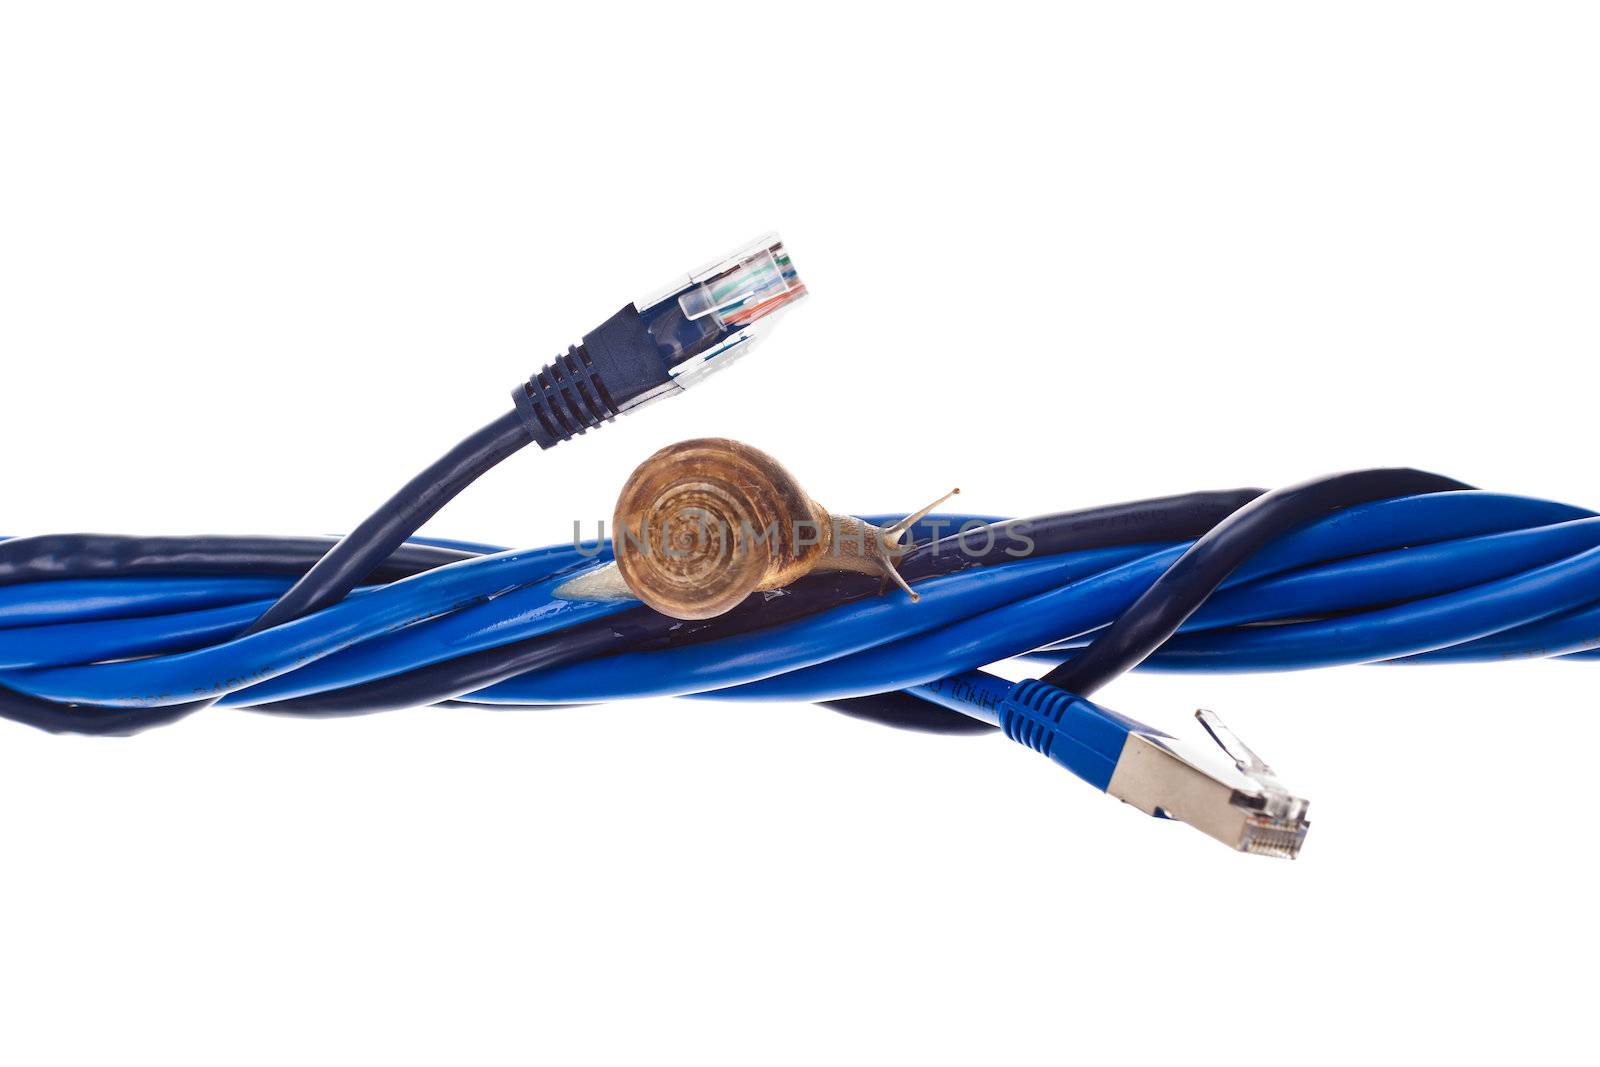 Snails moving on twisted lan cables